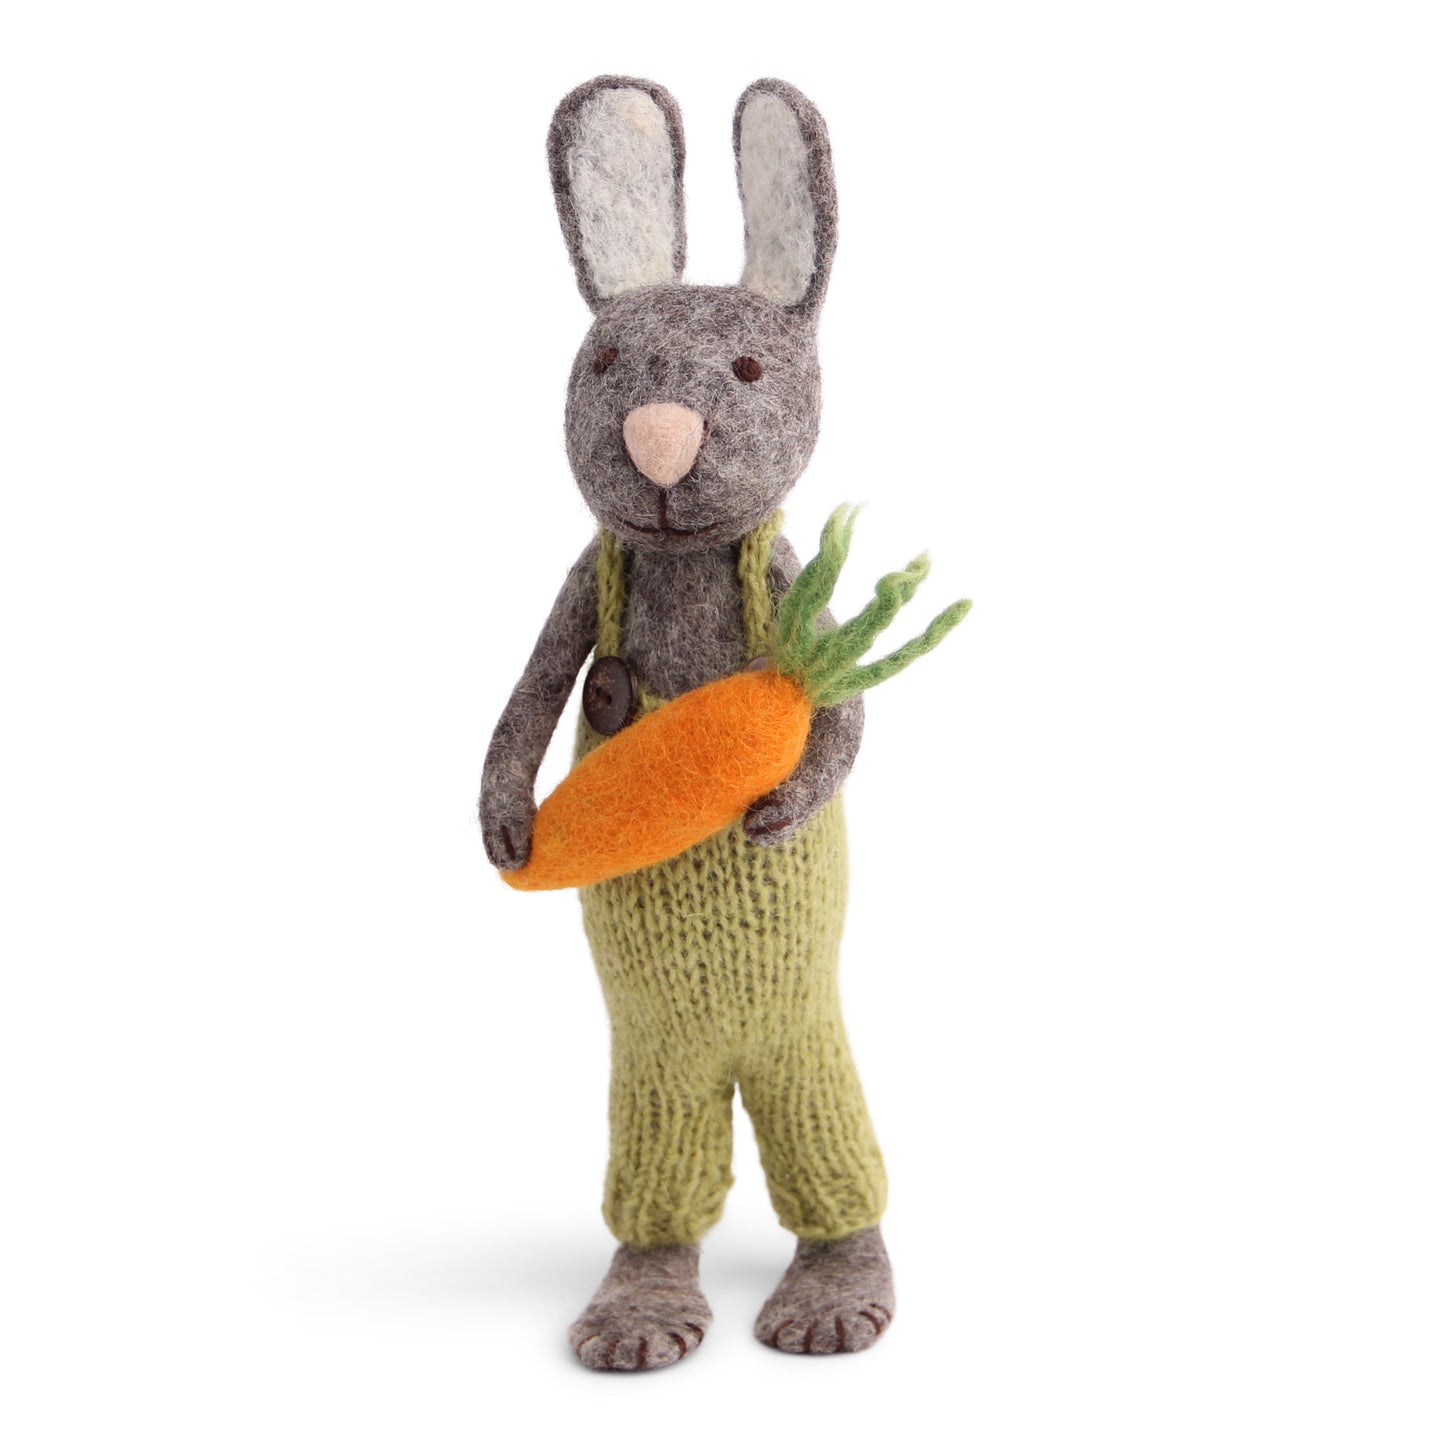 Big Grey Bunny with Green Pants and Carrot